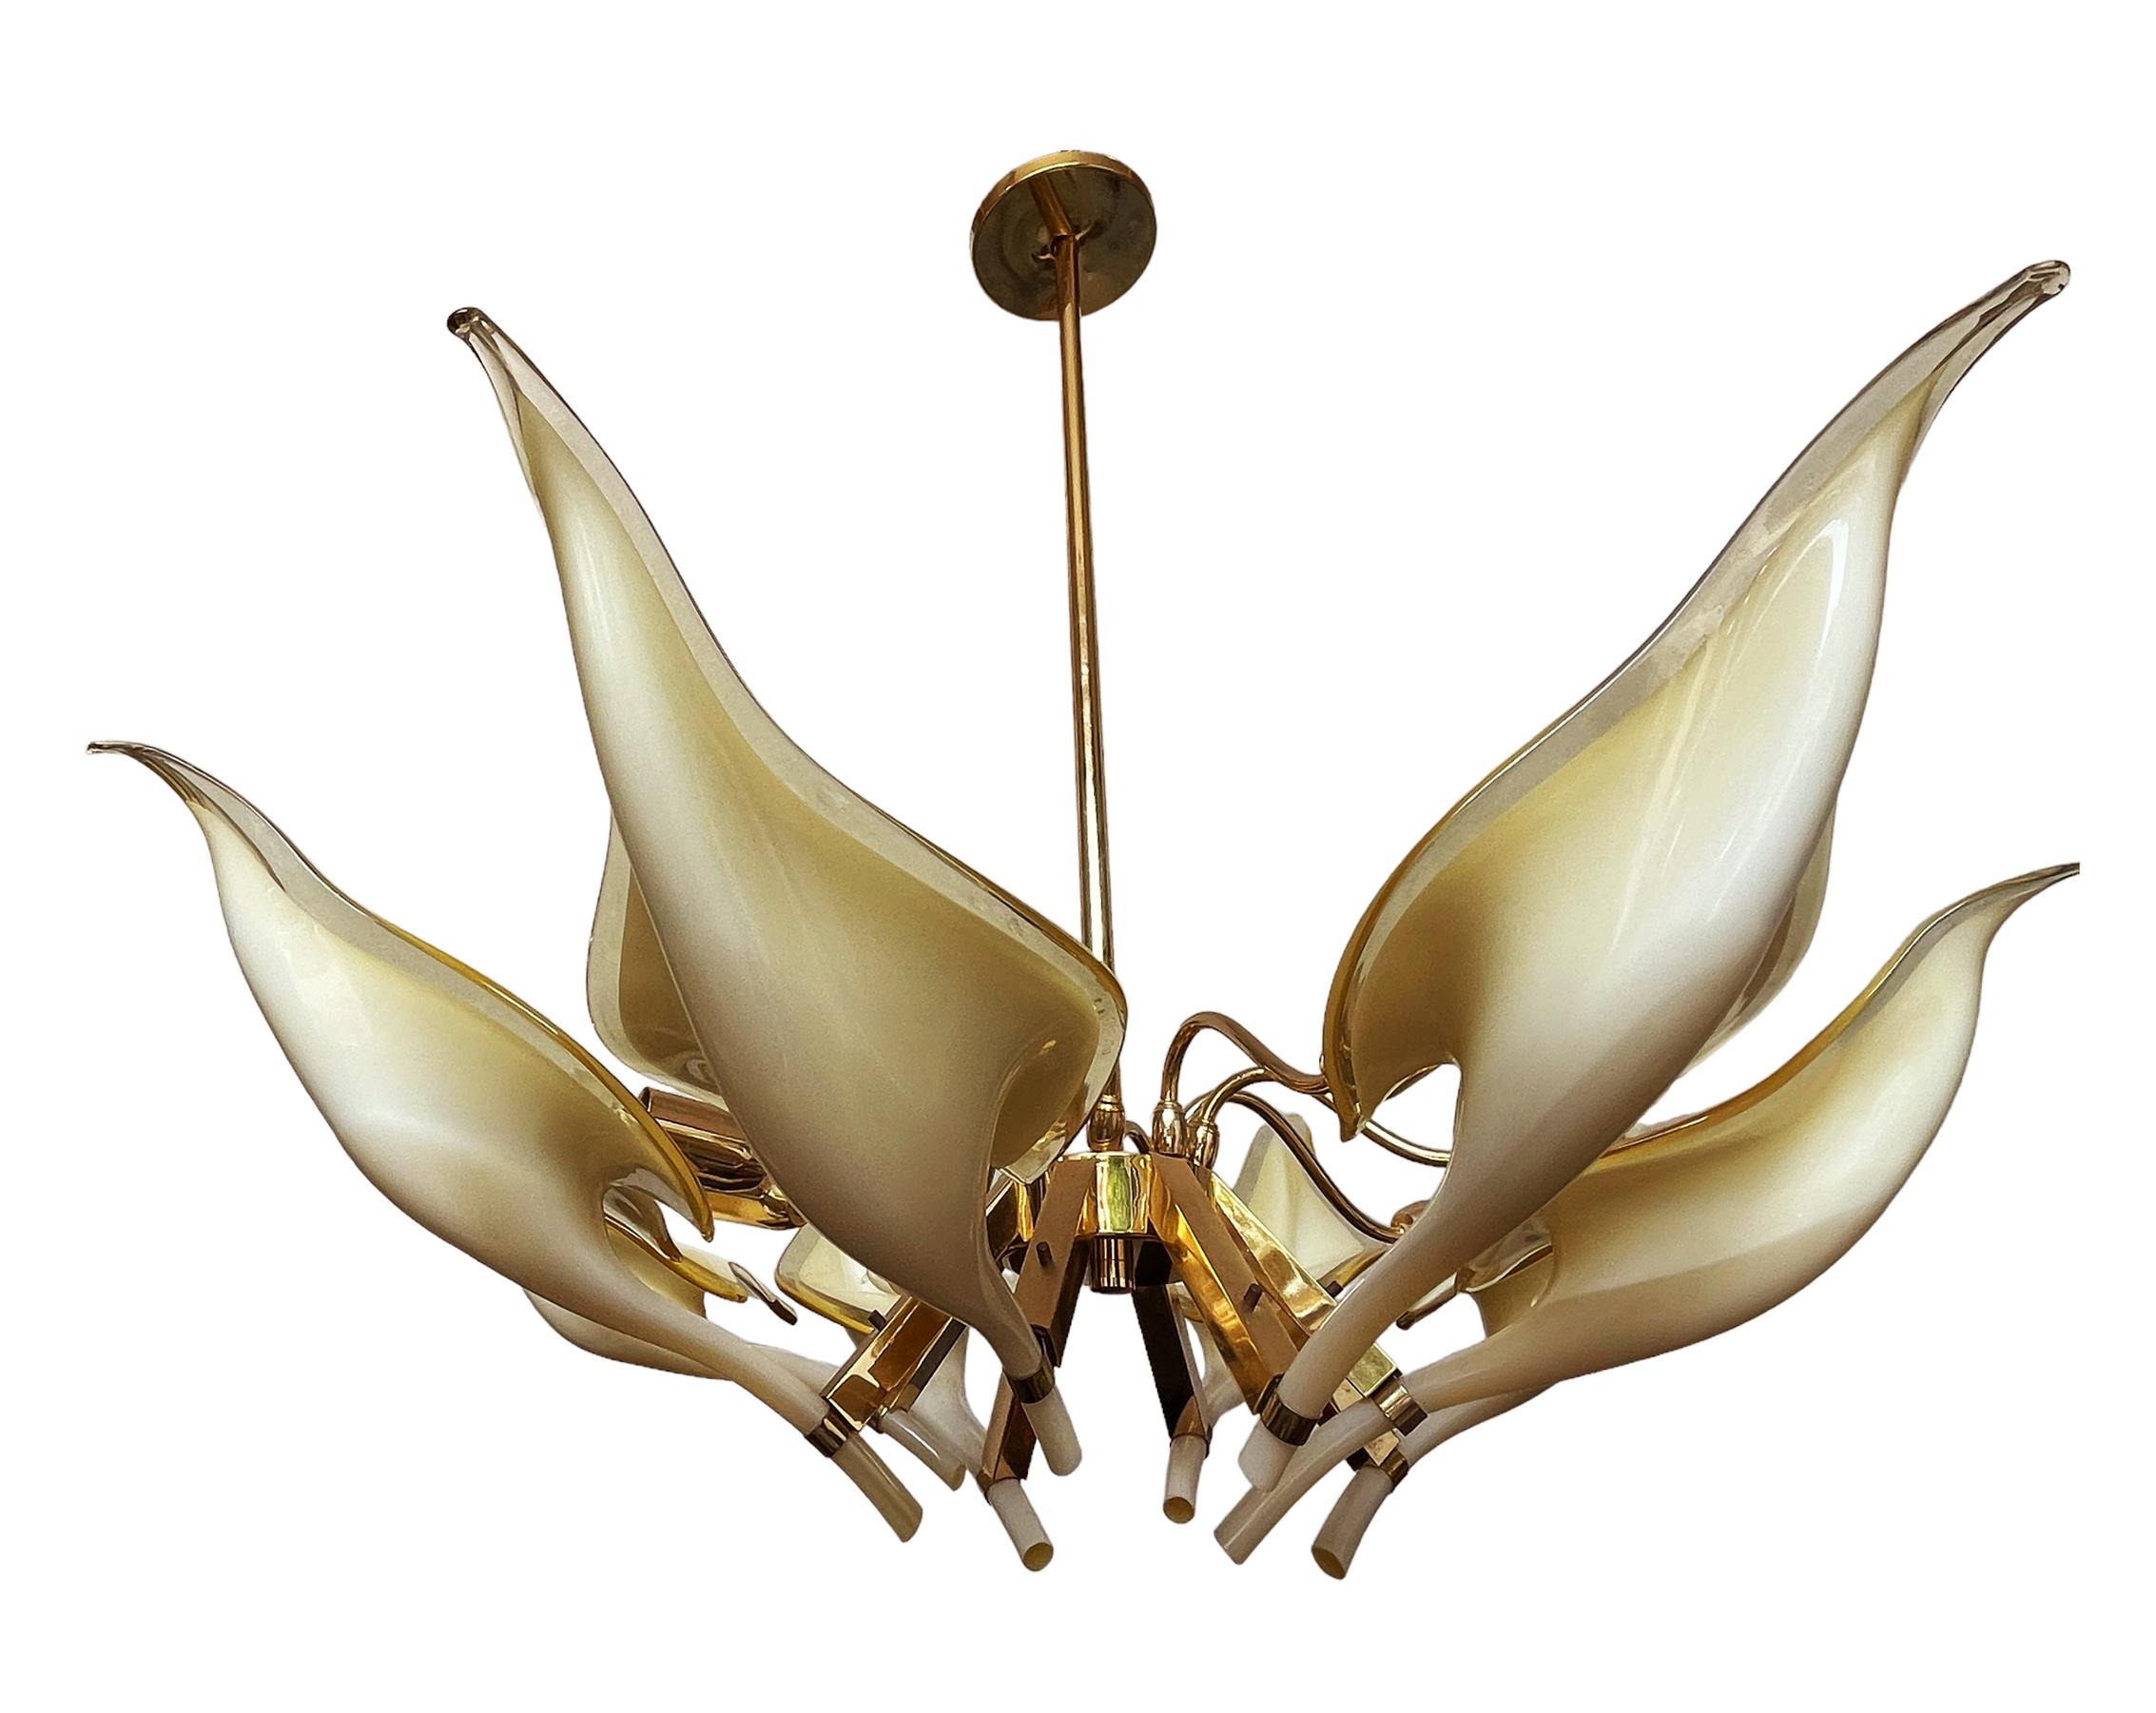 A lovely vintage chandelier designed by Franco Luce for Murano glass circa 1970's. It features handblown glass lily form shades with brass frame. Very good working condition. 